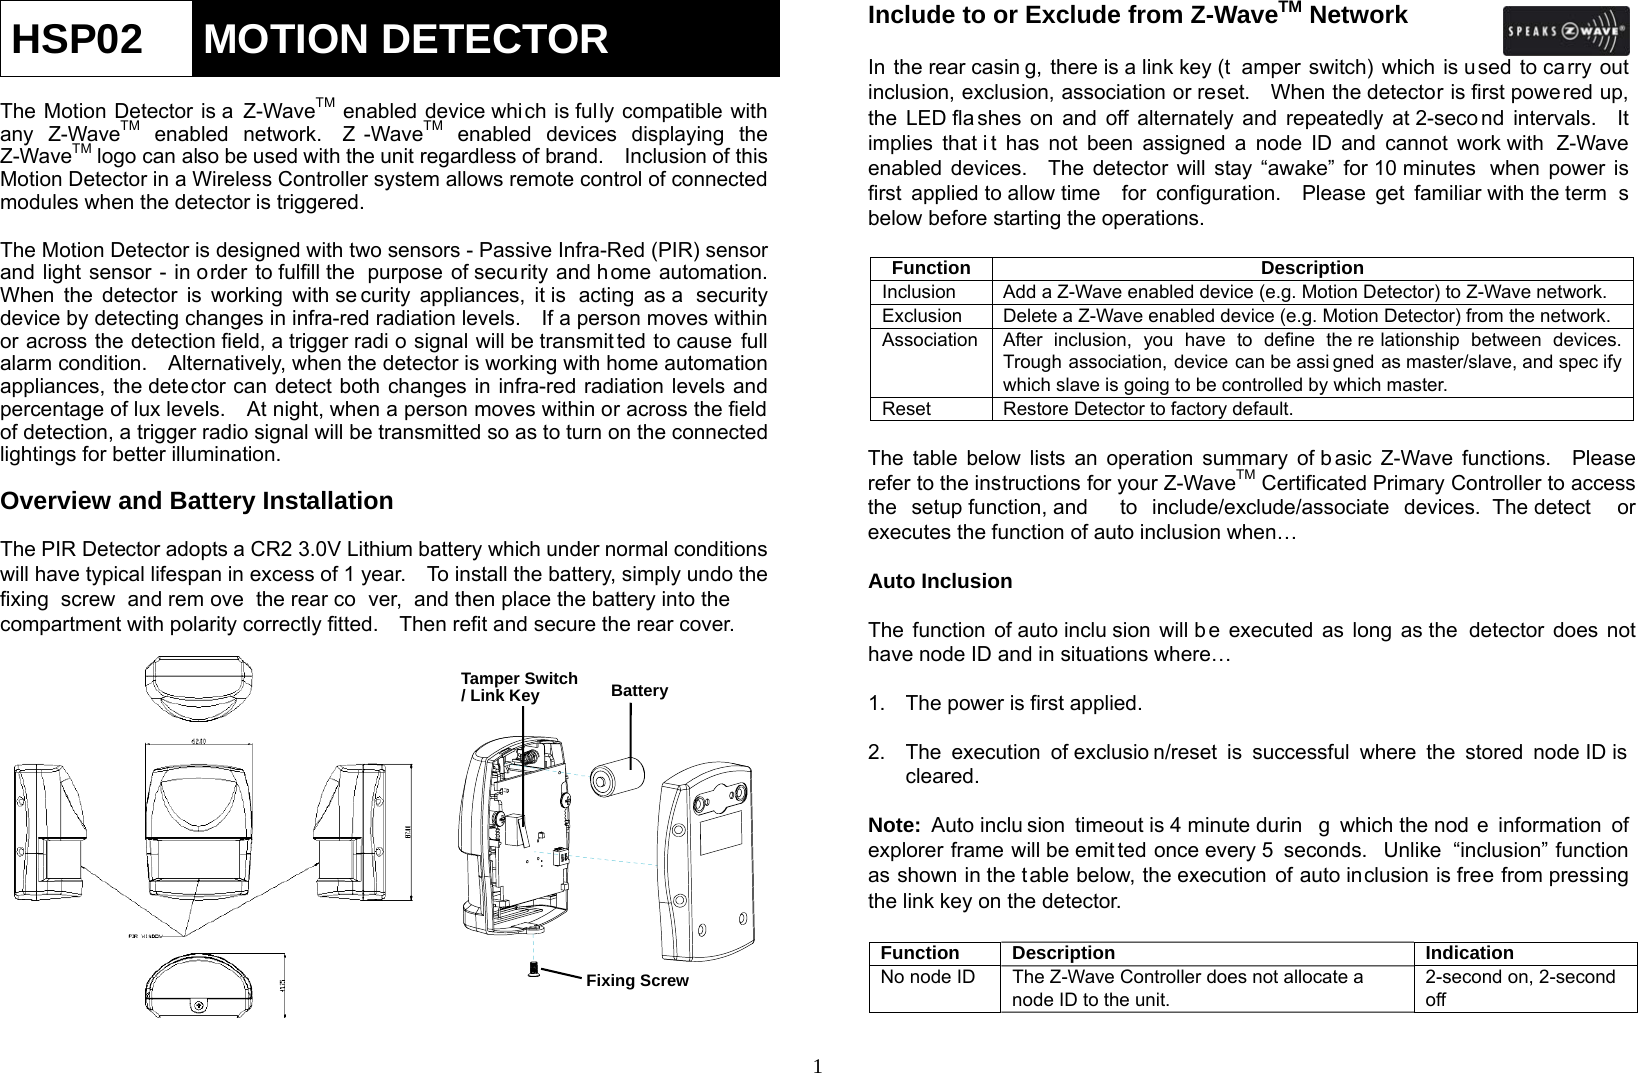  1HSP02  MOTION DETECTOR  The Motion Detector is a Z-WaveTM enabled device which is fully compatible with any Z-WaveTM enabled network.  Z -WaveTM enabled devices displaying the Z-WaveTM logo can also be used with the unit regardless of brand.    Inclusion of this Motion Detector in a Wireless Controller system allows remote control of connected modules when the detector is triggered.  The Motion Detector is designed with two sensors - Passive Infra-Red (PIR) sensor and light sensor - in order to fulfill the  purpose of security and home automation.   When the detector is working with se curity appliances, it is  acting as a  security device by detecting changes in infra-red radiation levels.    If a person moves within or across the detection field, a trigger radi o signal will be transmit ted to cause full alarm condition.    Alternatively, when the detector is working with home automation appliances, the detector can detect both changes in infra-red radiation levels and percentage of lux levels.    At night, when a person moves within or across the field of detection, a trigger radio signal will be transmitted so as to turn on the connected lightings for better illumination.  Overview and Battery Installation  The PIR Detector adopts a CR2 3.0V Lithium battery which under normal conditions will have typical lifespan in excess of 1 year.    To install the battery, simply undo the fixing screw and rem ove the rear co ver, and then place the battery into the  compartment with polarity correctly fitted.    Then refit and secure the rear cover.                Include to or Exclude from Z-WaveTM Network  In the rear casin g, there is a link key (t amper switch) which is used to carry out inclusion, exclusion, association or reset.    When the detector is first powered up, the LED fla shes on and off alternately and repeatedly at 2-seco nd intervals.  It implies that i t has not been assigned a node ID and cannot work with  Z-Wave enabled devices.  The detector will stay “awake” for 10 minutes  when power is first applied to allow time  for configuration.  Please get familiar with the term s below before starting the operations.  Function Description Inclusion   Add a Z-Wave enabled device (e.g. Motion Detector) to Z-Wave network. Exclusion   Delete a Z-Wave enabled device (e.g. Motion Detector) from the network. Association  After inclusion, you have to define the re lationship between devices. Trough association, device can be assi gned as master/slave, and spec ify which slave is going to be controlled by which master. Reset Restore Detector to factory default.  The table below lists an operation summary of b asic Z-Wave functions.  Please refer to the instructions for your Z-WaveTM Certificated Primary Controller to access the setup function, and  to include/exclude/associate devices.  The detect or executes the function of auto inclusion when…  Auto Inclusion  The function of auto inclu sion will b e executed as long as the  detector does not have node ID and in situations where…  1.  The power is first applied.  2.  The execution of exclusio n/reset is successful where the stored node ID is  cleared.  Note: Auto inclu sion timeout is 4 minute durin g which the nod e information of explorer frame will be emit ted once every 5  seconds.  Unlike “inclusion” function as shown in the table below, the execution of auto inclusion is free from pressing the link key on the detector.  Function Description Indication No node ID  The Z-Wave Controller does not allocate a node ID to the unit. 2-second on, 2-second off Tamper Switch / Link KeyBattery Fixing Screw